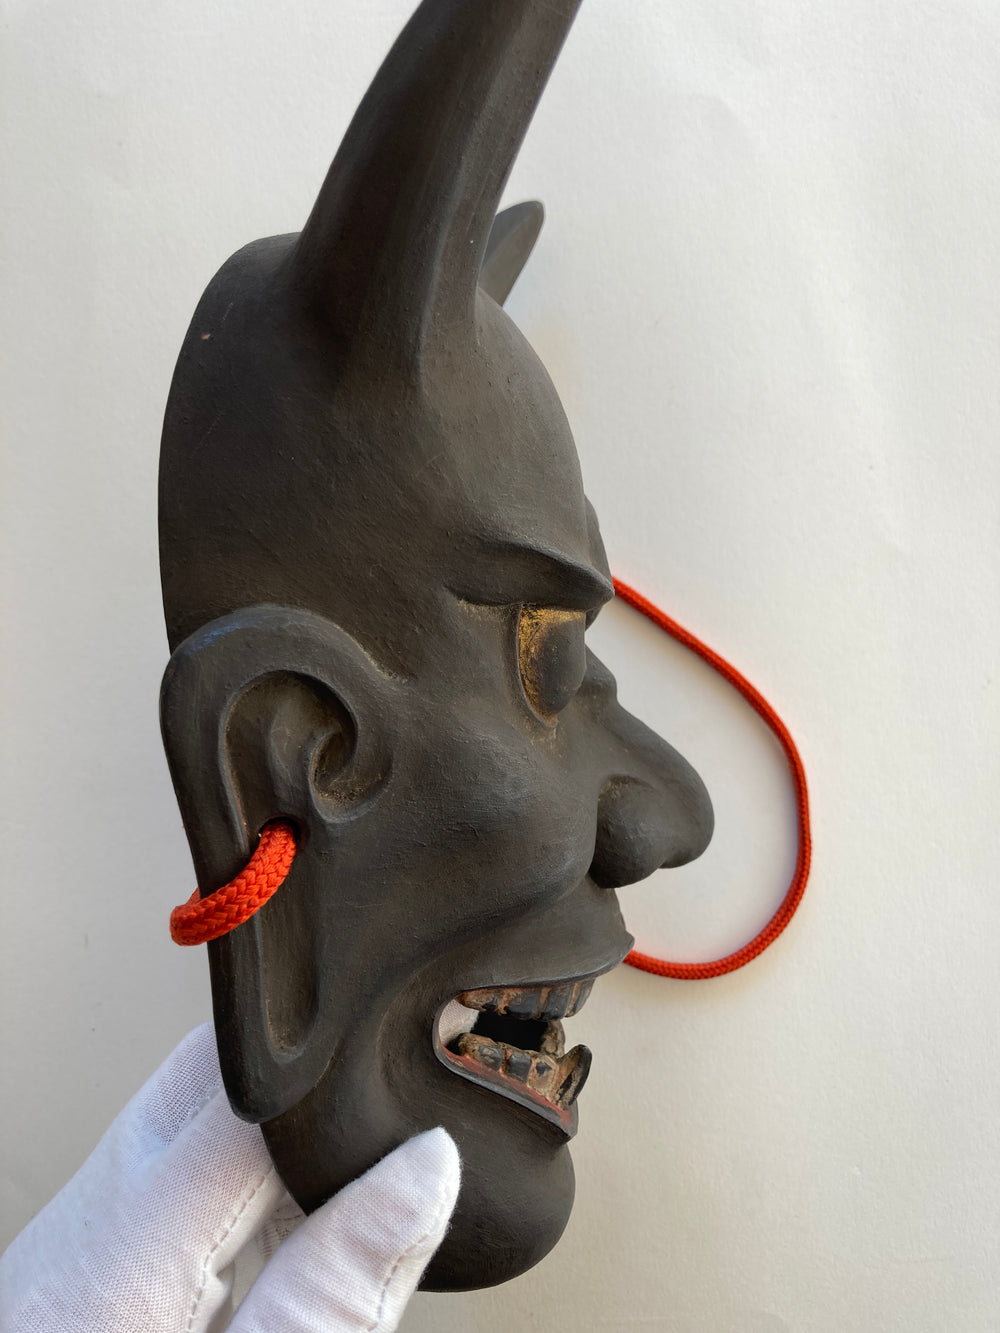 HANNYA by “Arakou”. (Carved in wood, with Pawlonia Box, Silk Bag and Handwritten Certificated).